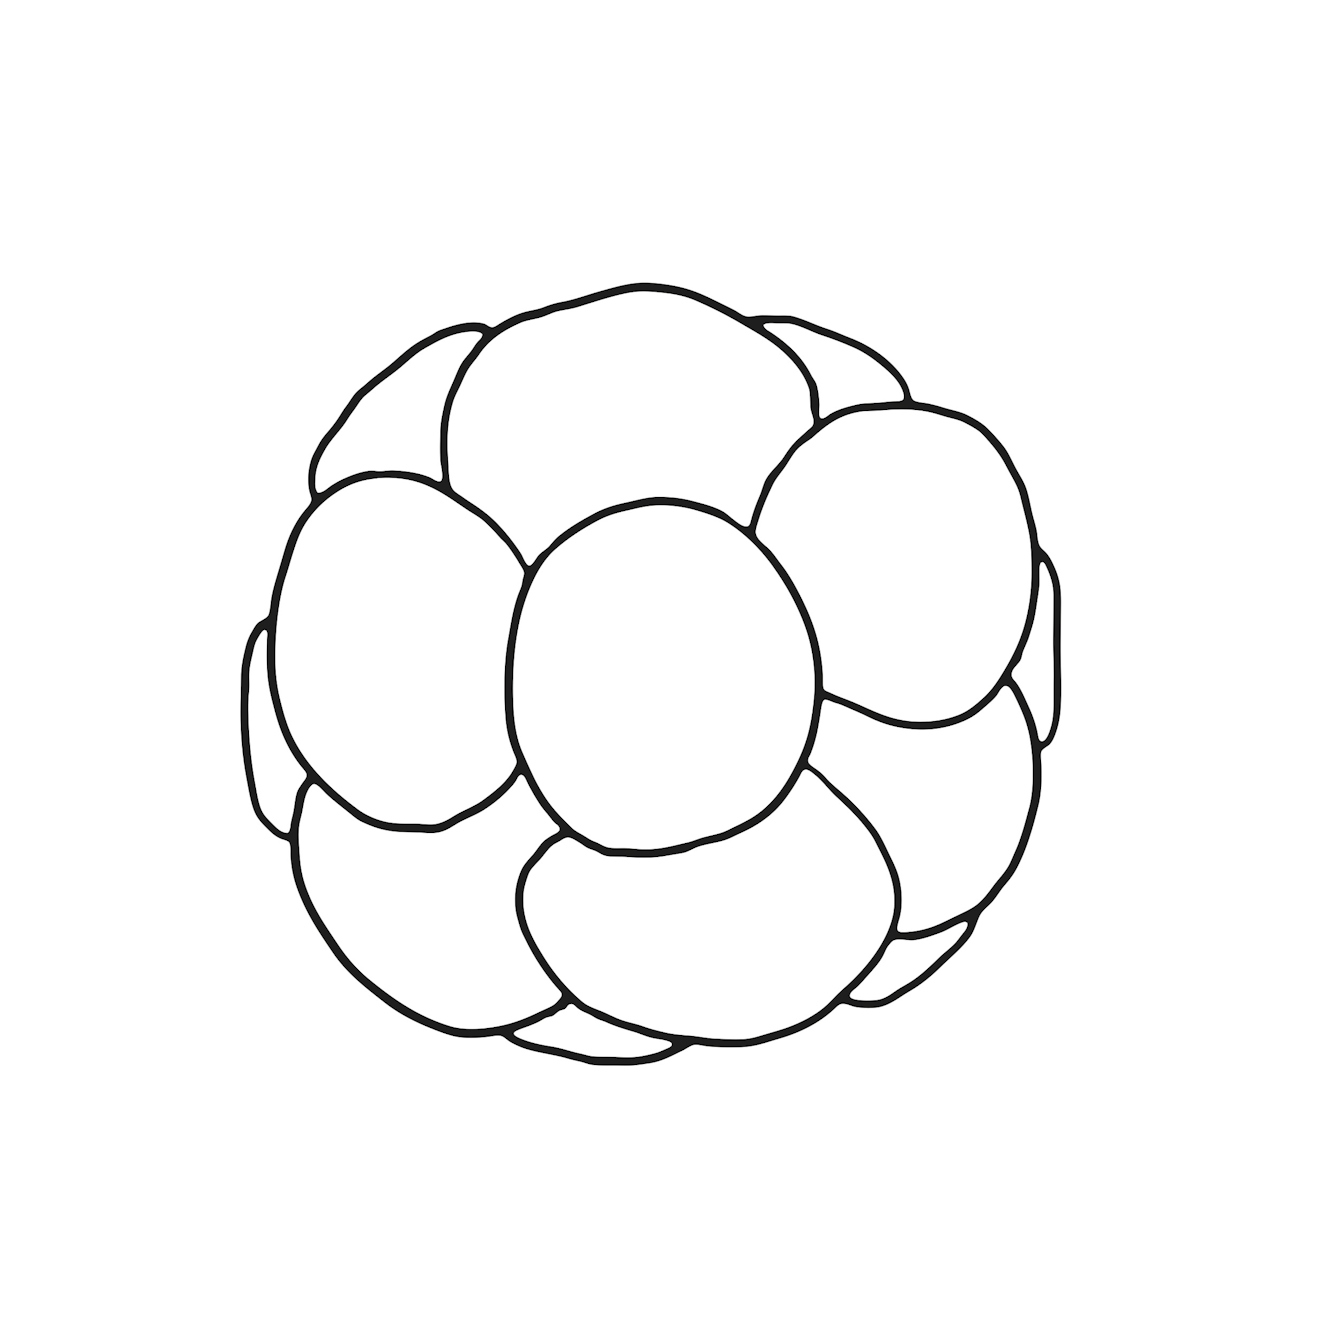 Line illustration of round shape made of circles bunched together - representing cells dividing